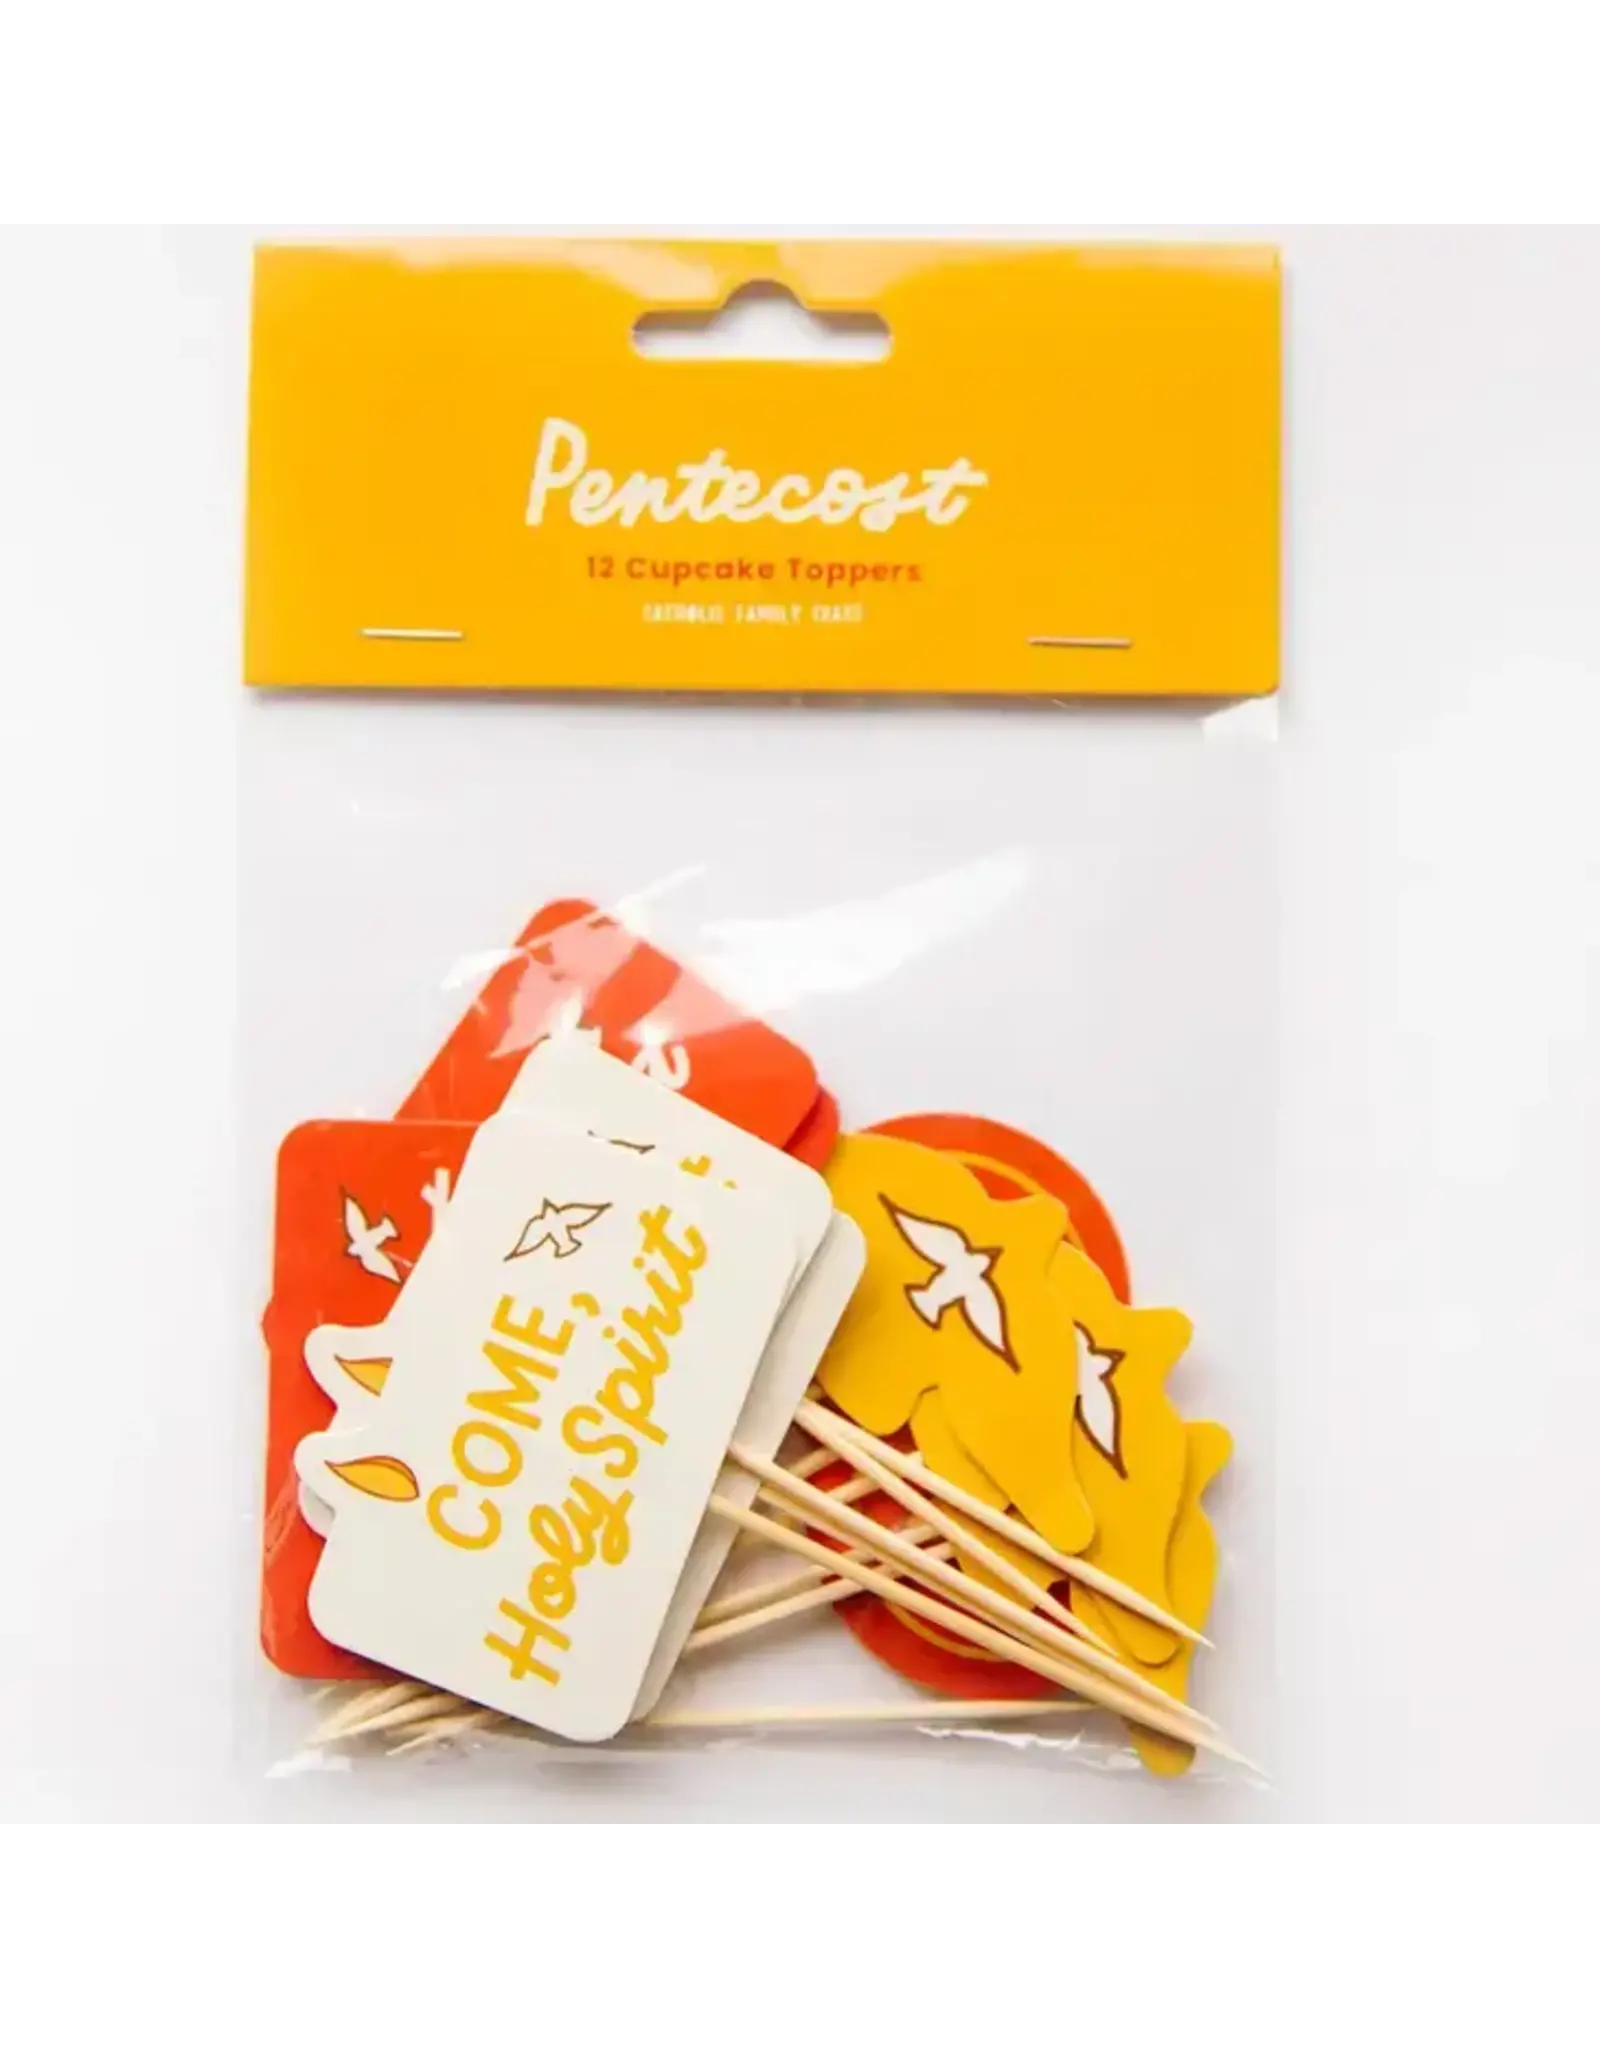 Catholic Family Crate Cupcake Toppers - Pentecost